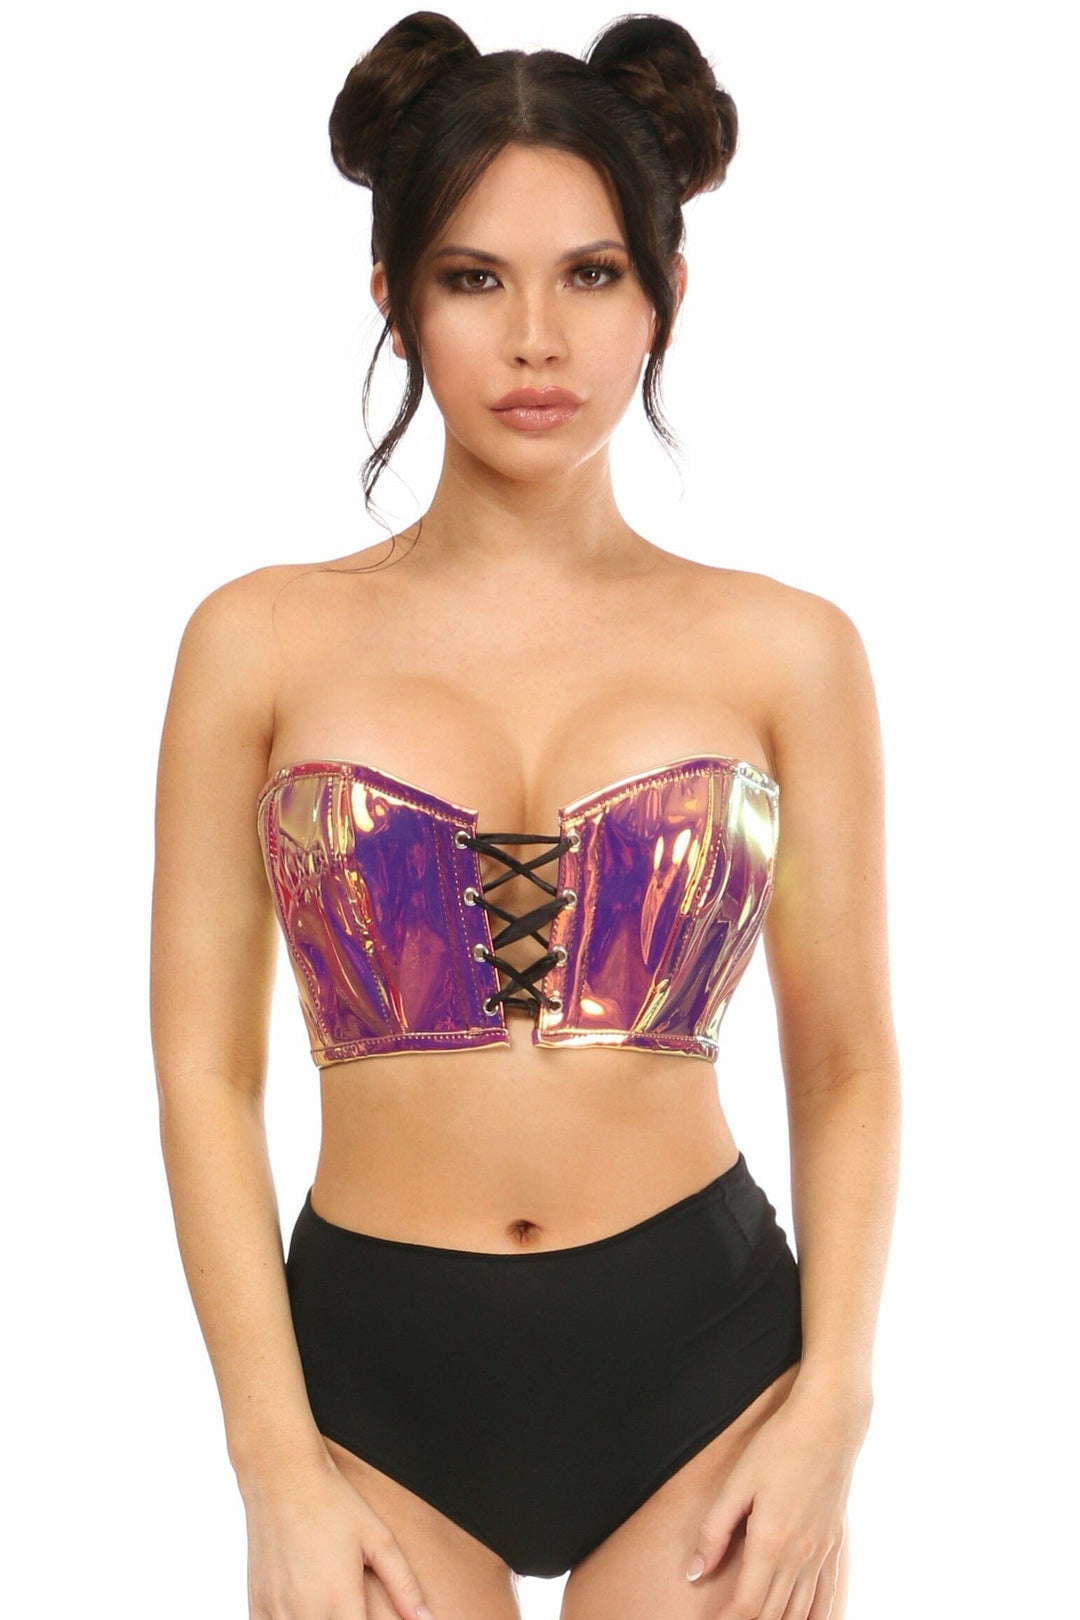 Lavish Rainbow Gold Holo Lace-Up Bustier Top-Bustier Tops-Daisy Corsets-Hologram-S-SEXYSHOES.COM